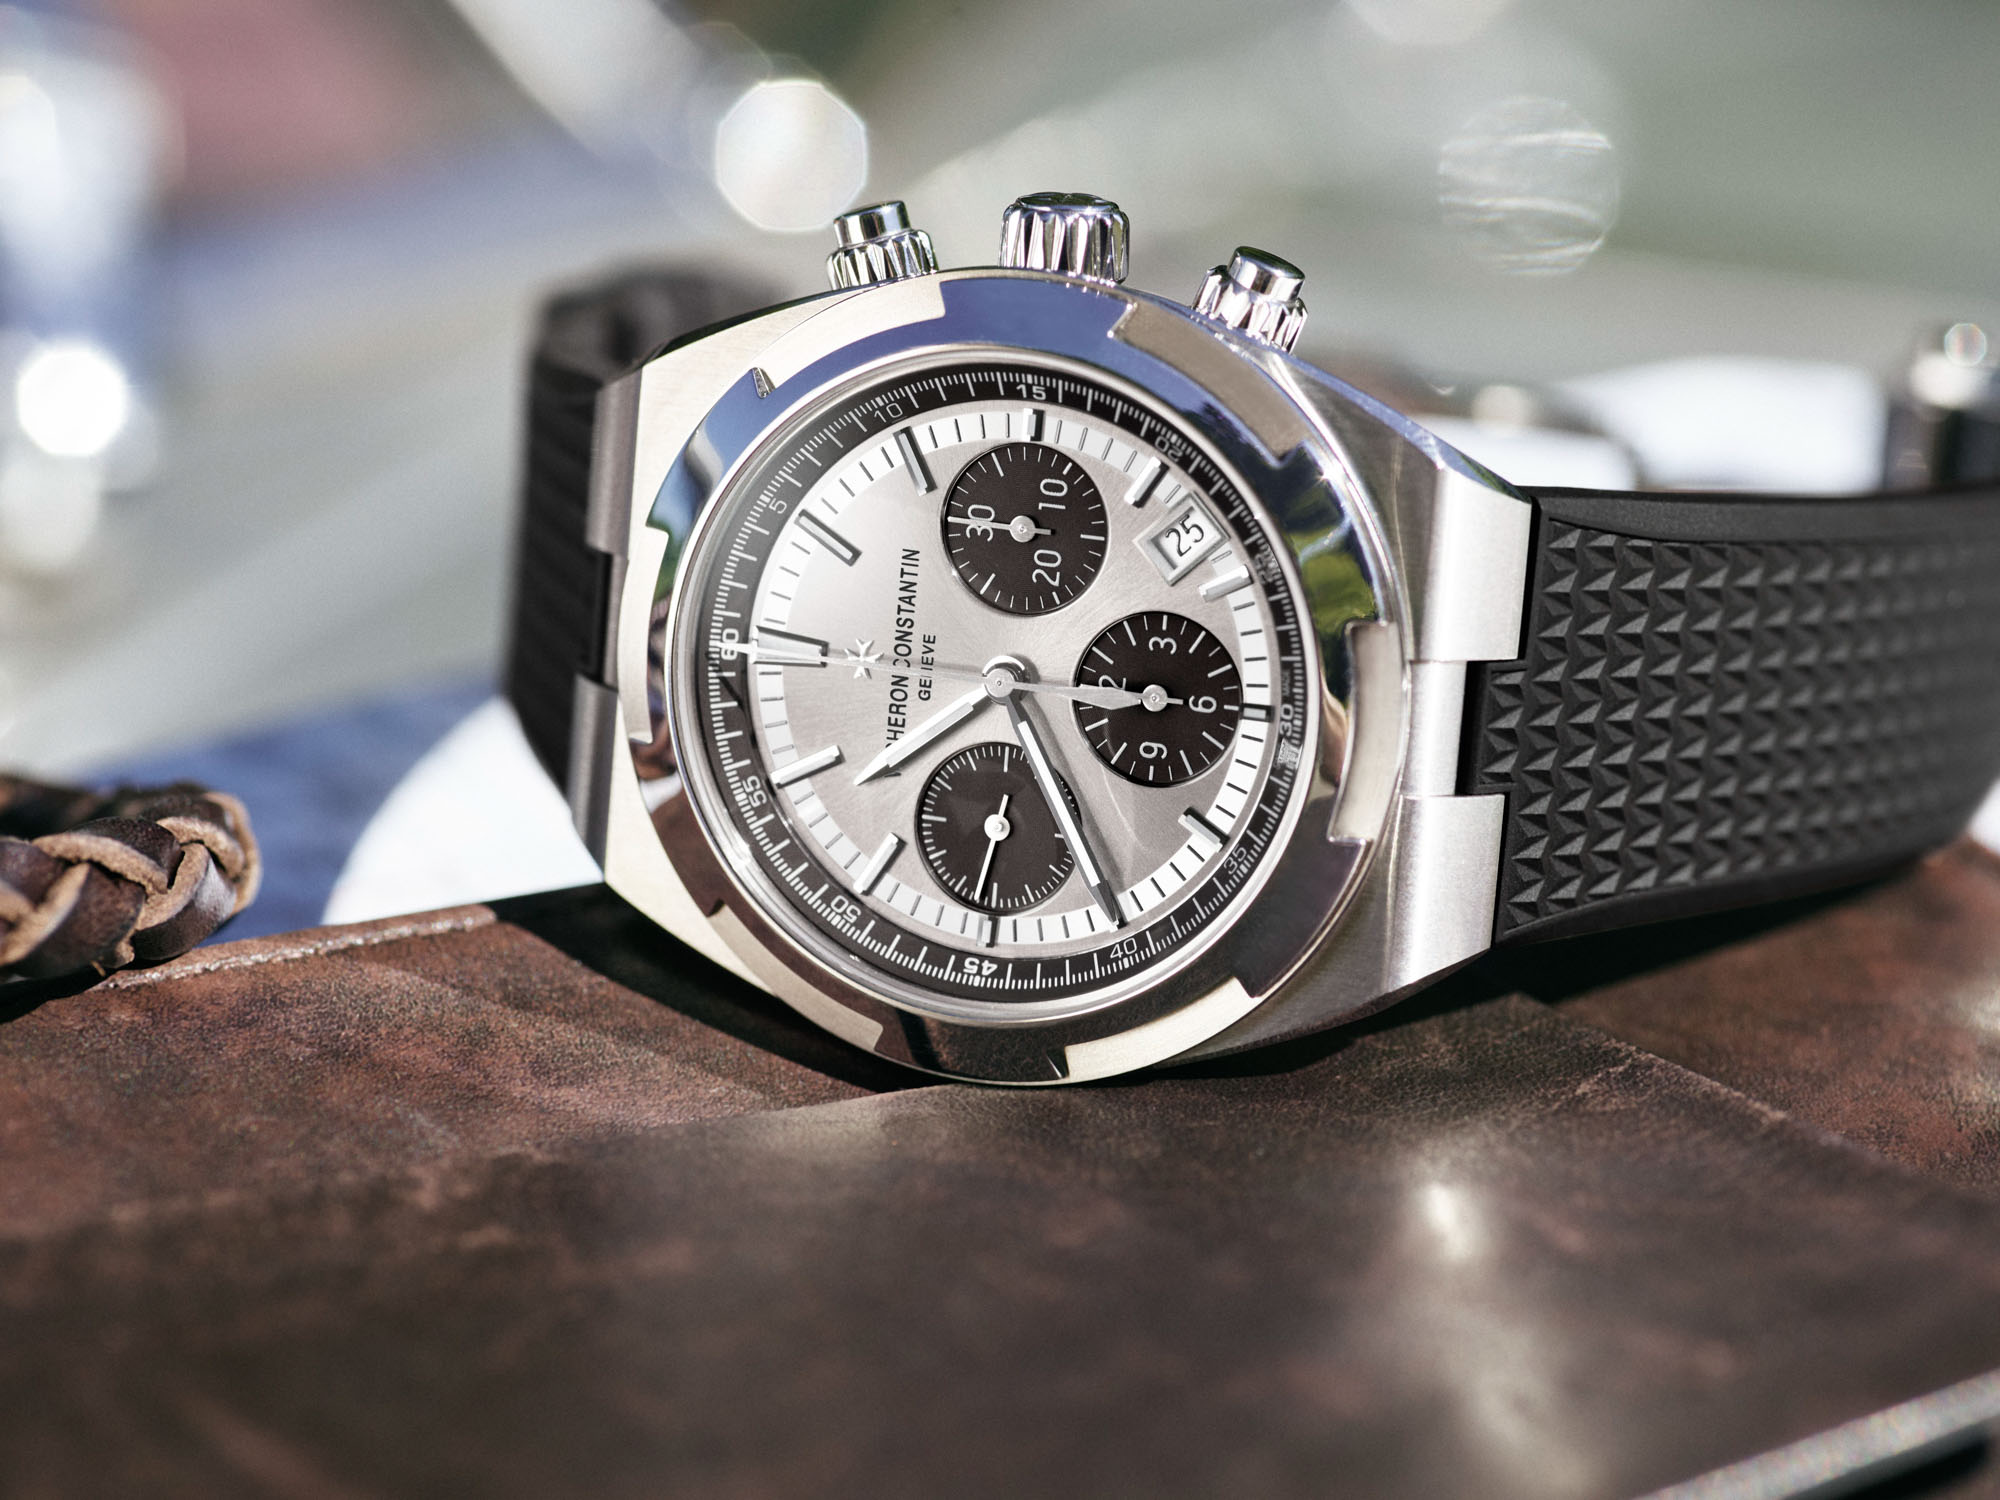 Unveiling the Allure of Good Imitation Vacheron Constantin Watches with the New “Panda” Dial